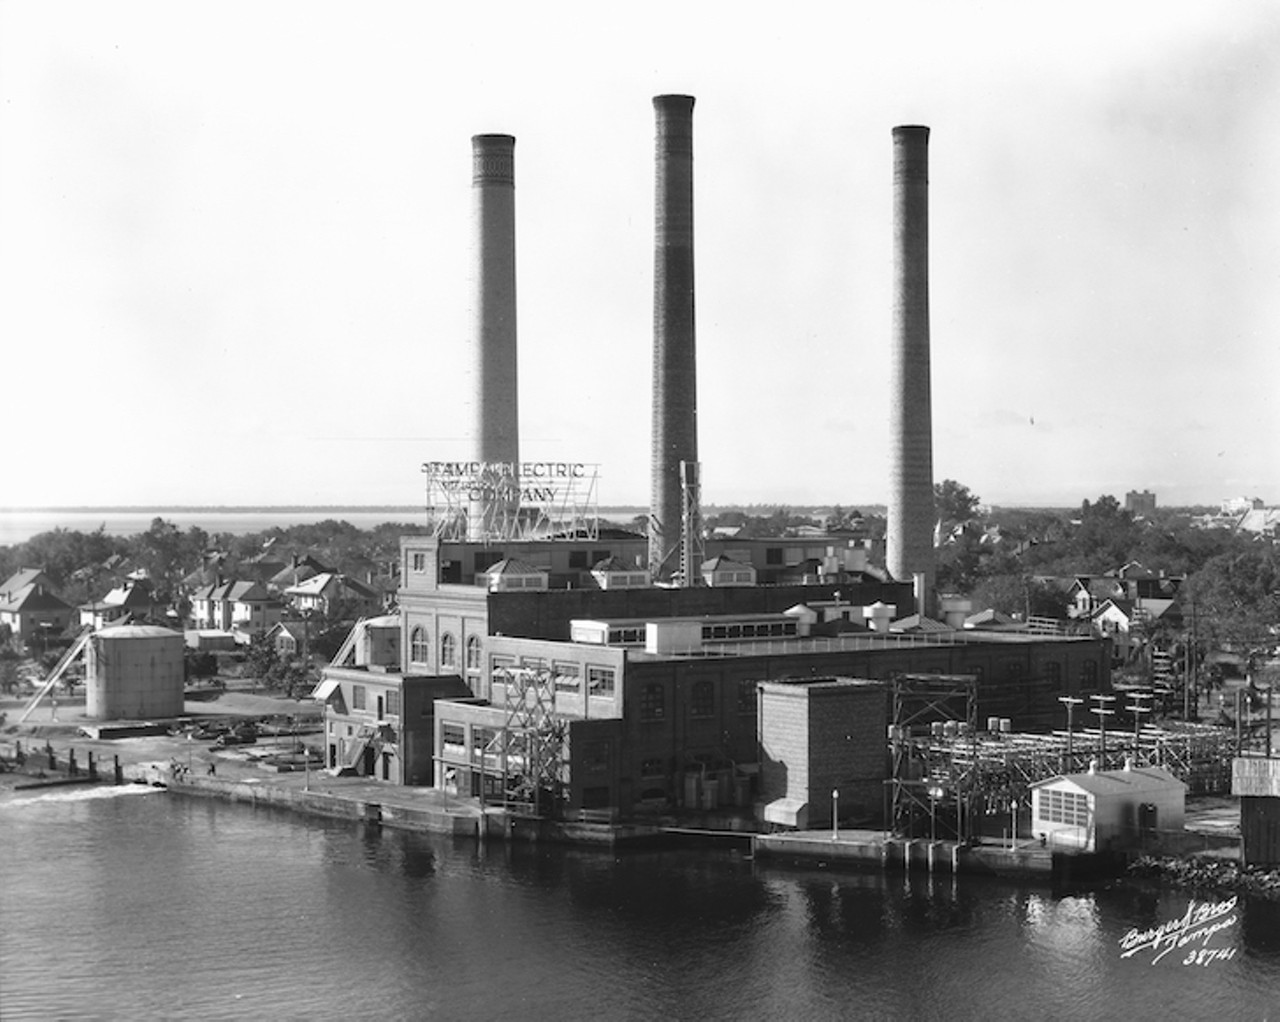 THEN
Tampa Electric Company power plant on Hillsborough River
Looking southwest, 1936
This Tampa Electric coal-fired plant operated on the banks of the Hillsborough River, using its water for cooling. Before becoming the city&#146;s primary electricity supplier, Tampa Electric was in the business of operating streetcars in the 1920s. As they grew to be the primary electrical utility for Tampa, public outcry about exorbitant prices for power and charges of political corruption were leveled in the 1930s and 1940s. The Tampa Tribune moved to the property on the west side of Hillsborough River after the construction of its new building in 1974. In March of 2000, the new $40 million WFLA Channel 8 building opened adjacent to the Tribune building as the two entities- both owned by Media General- joined forces to create the first-of-its-kind news service.